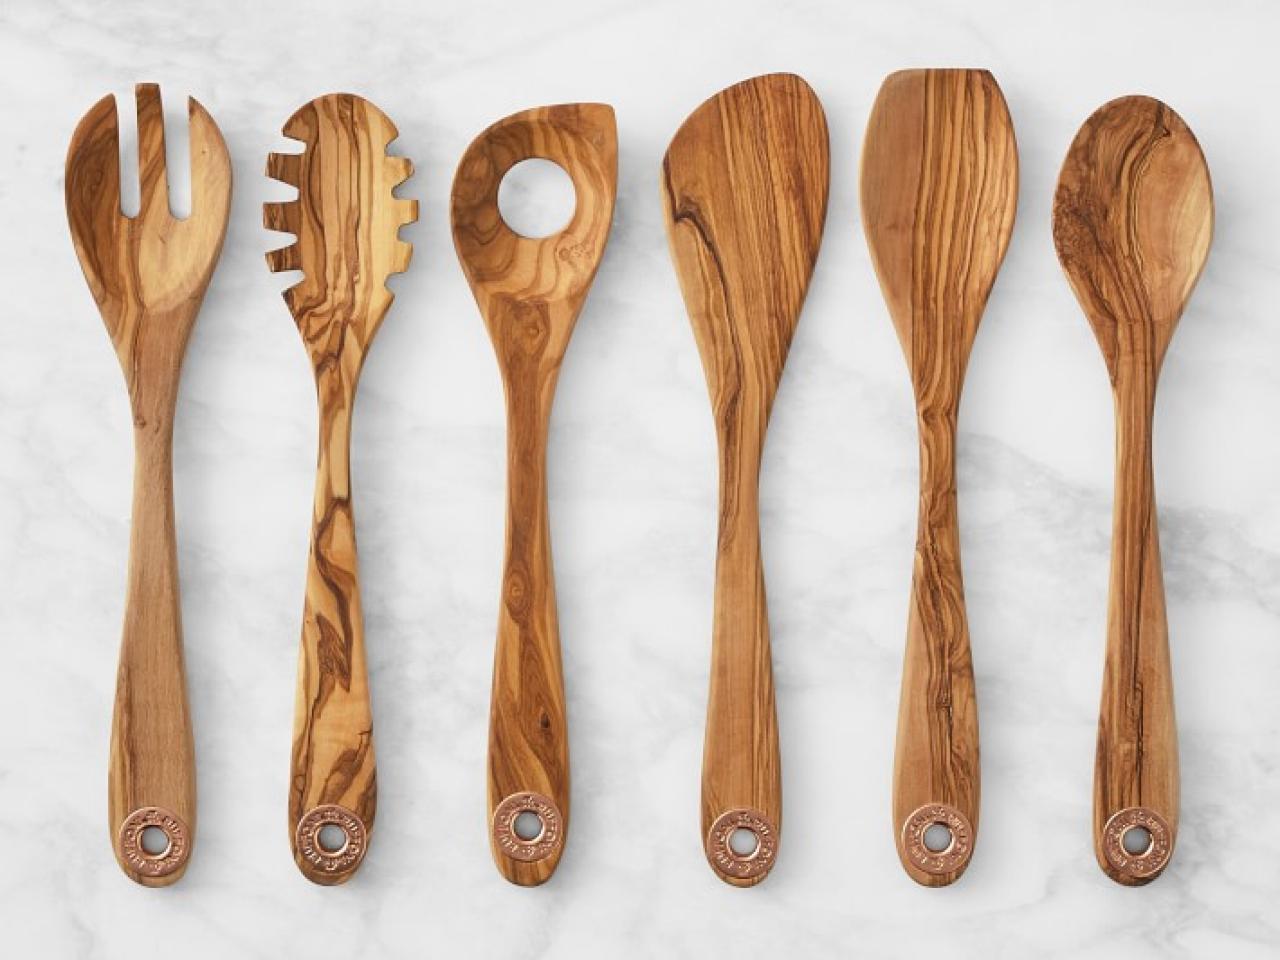 7 Best Kitchen Utensil Sets for Cooking and Baking in Any Kitchen, Shopping : Food Network